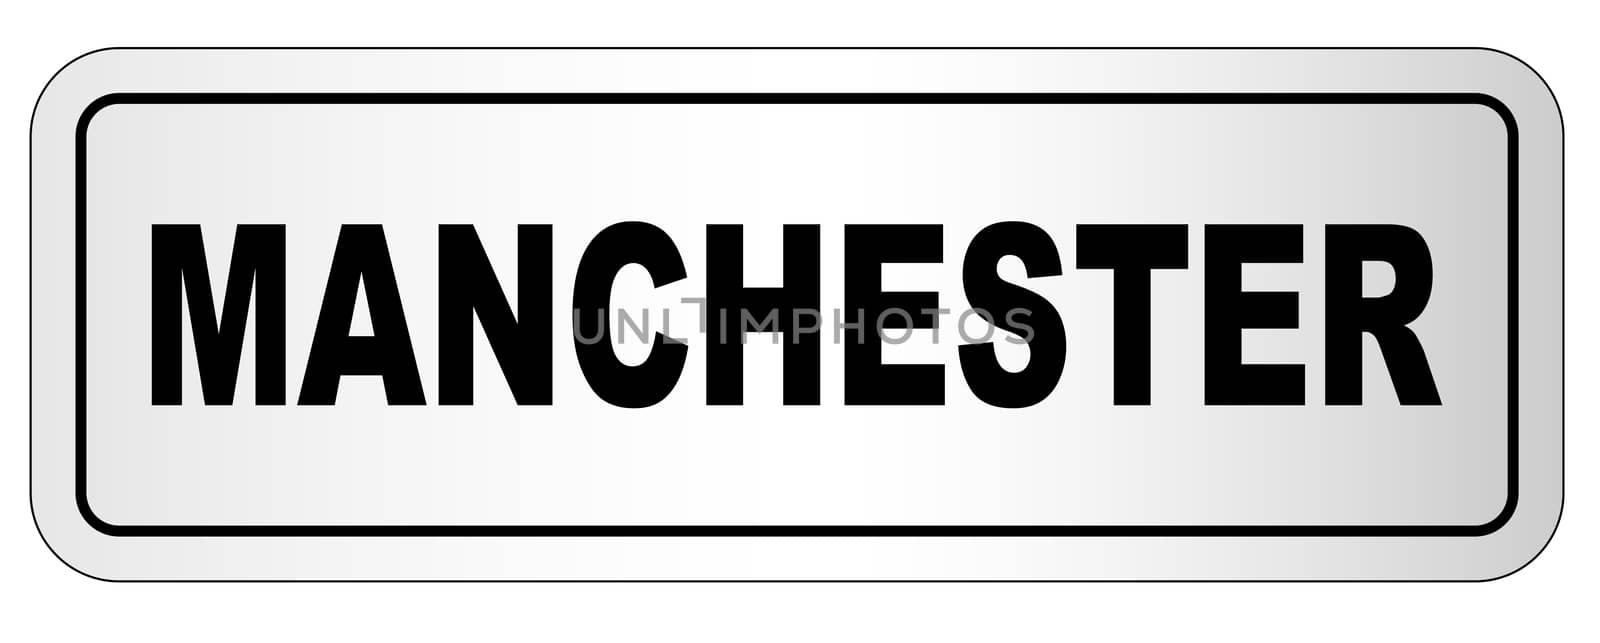 The city of Manchester nameplate on a white background